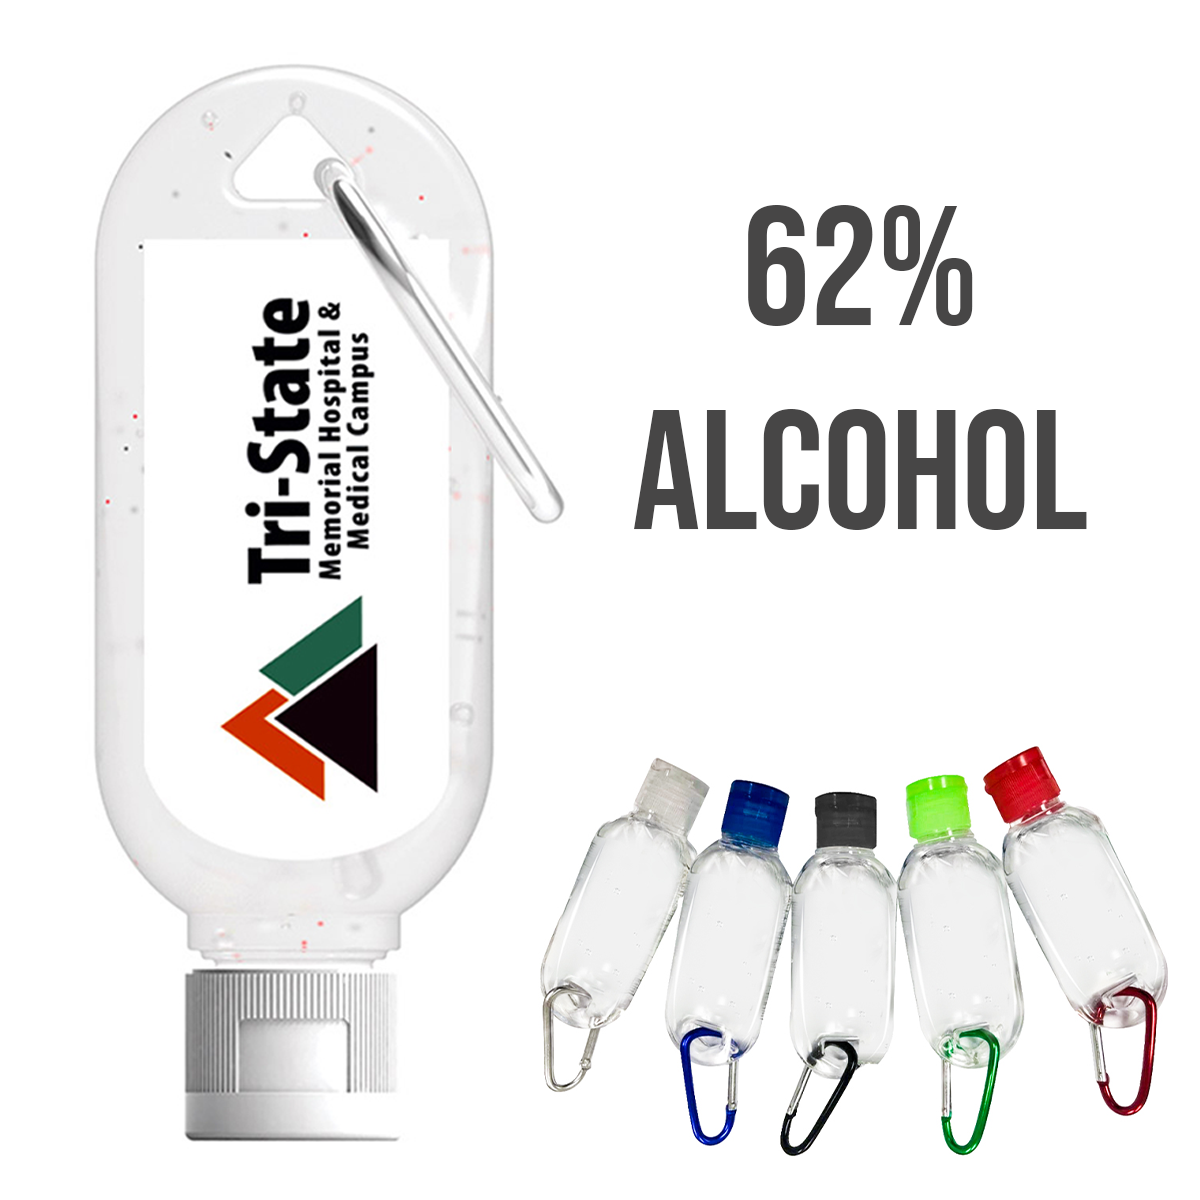 62% ALCOHOL HAND SANITIZER WITH CARABINER CLIP